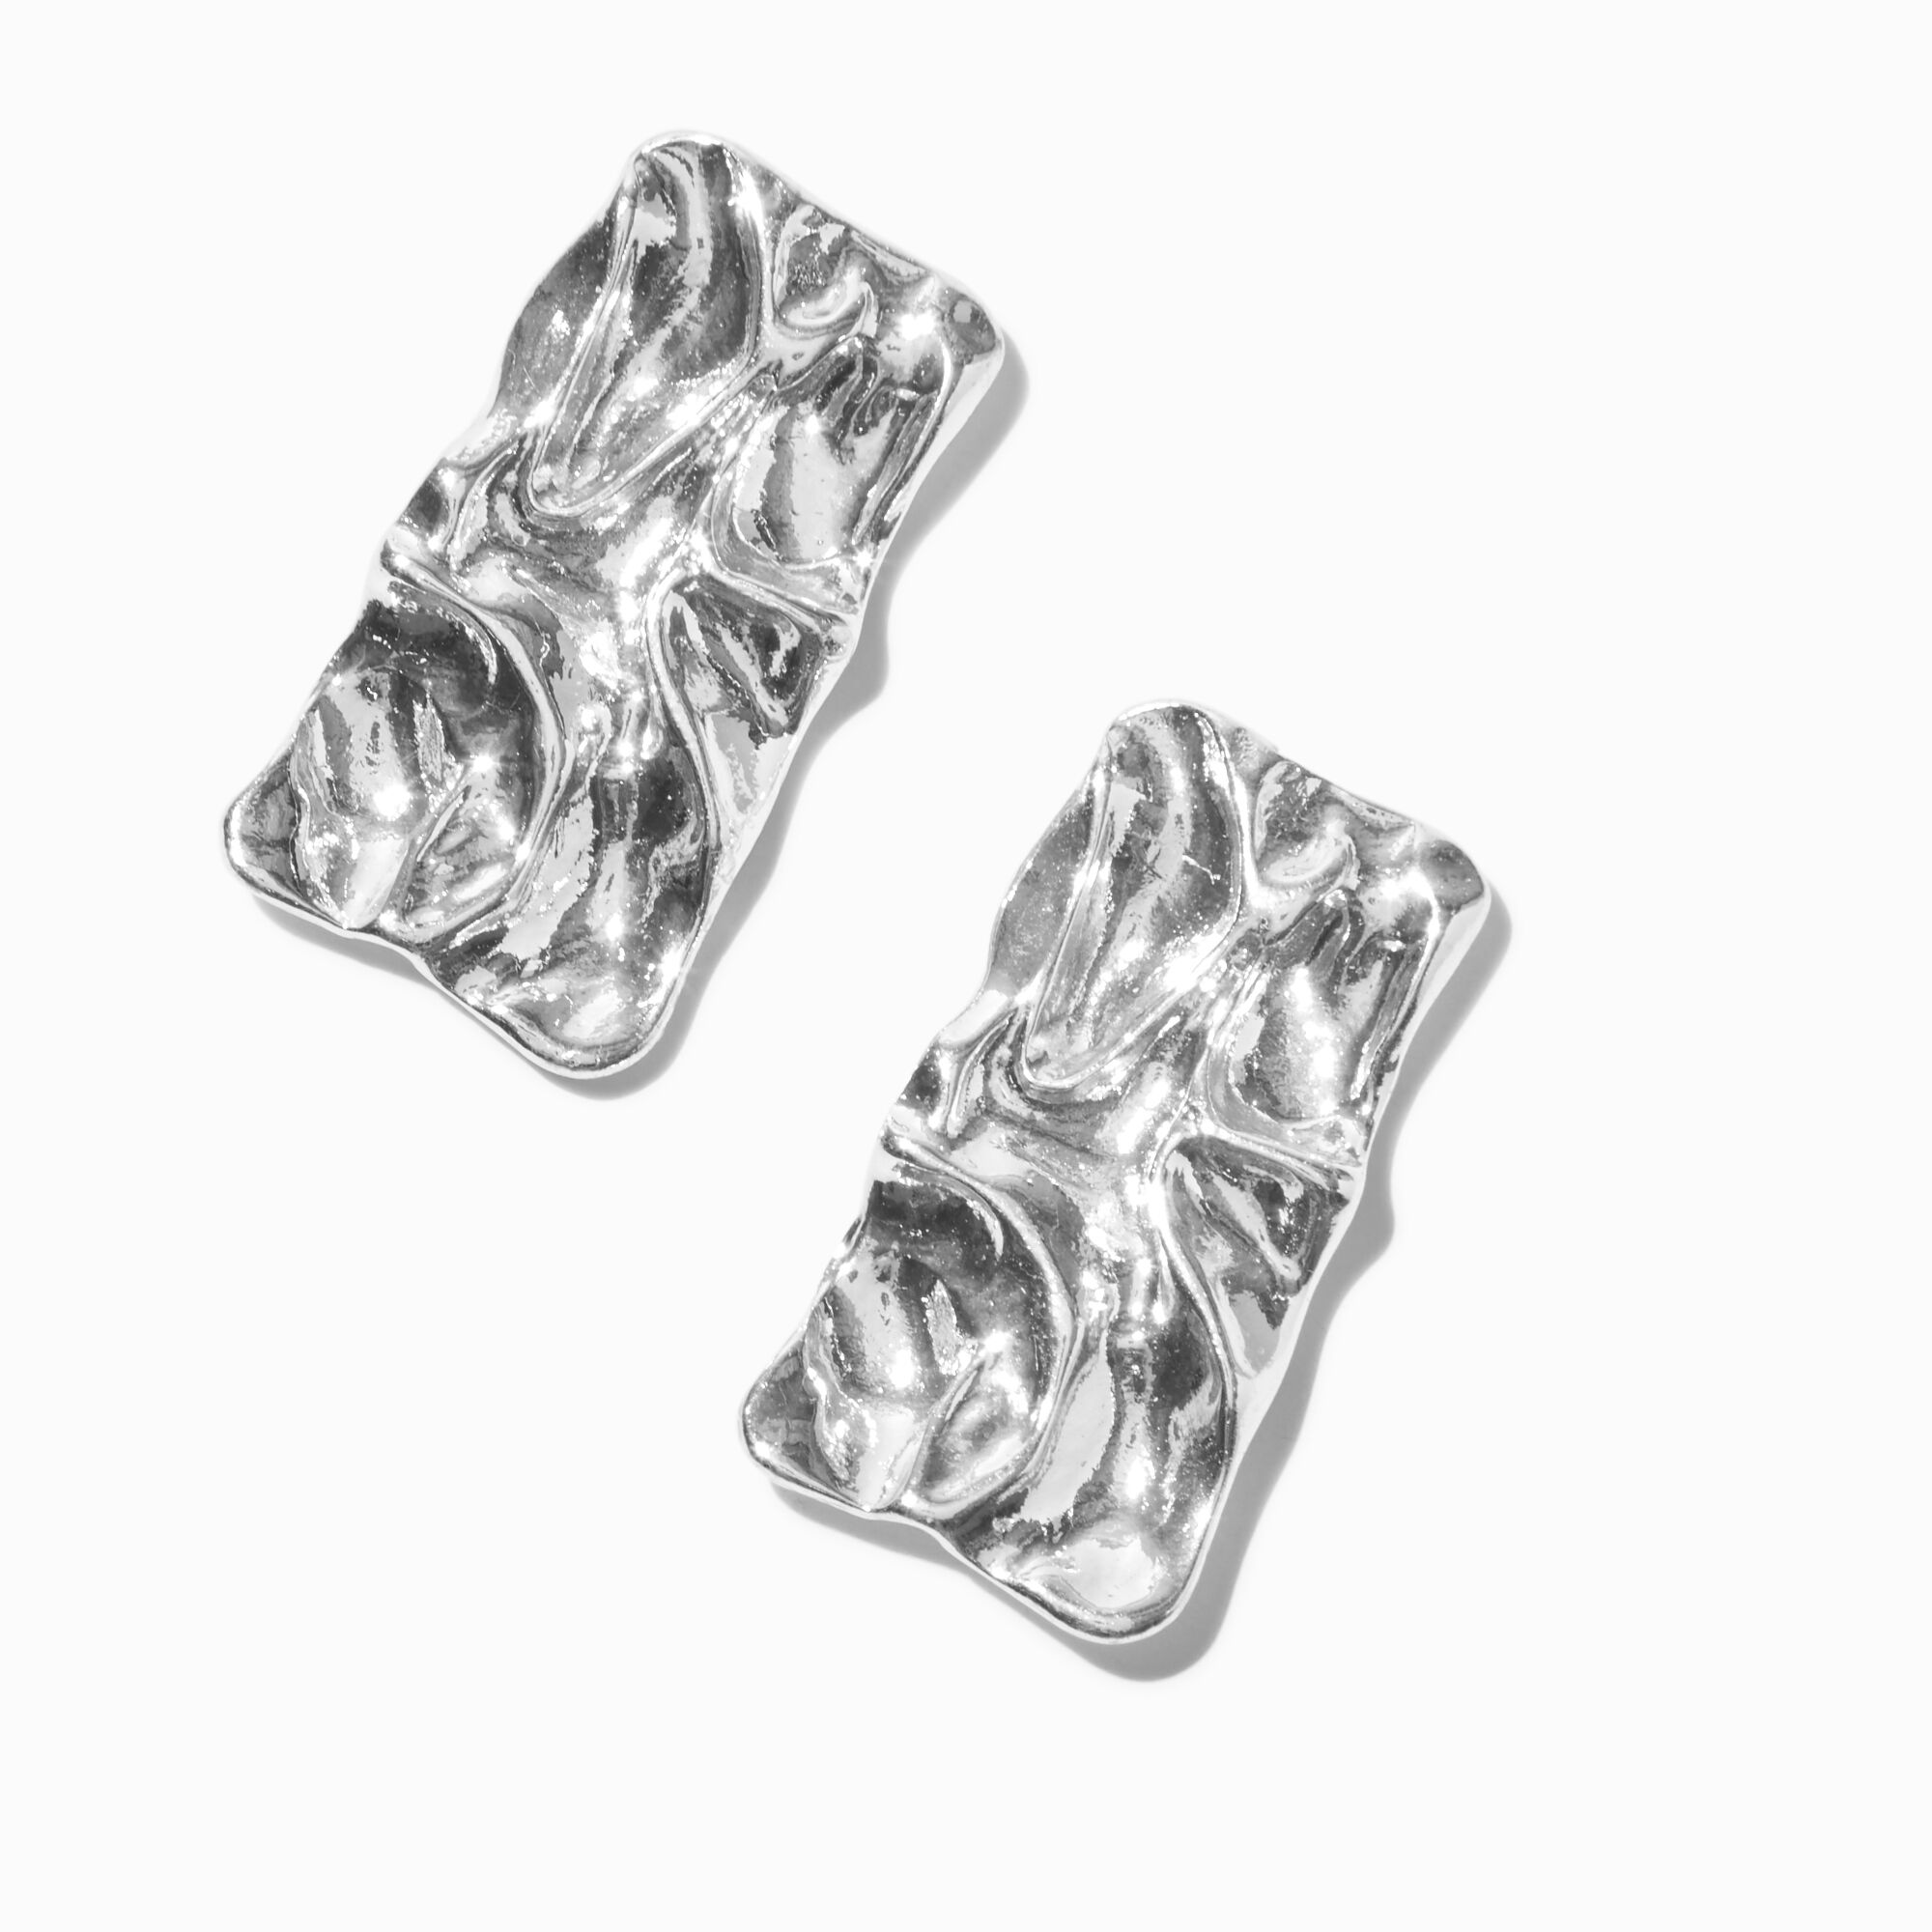 claire's silver-tone crumpled rectangle 1.5" drop earrings